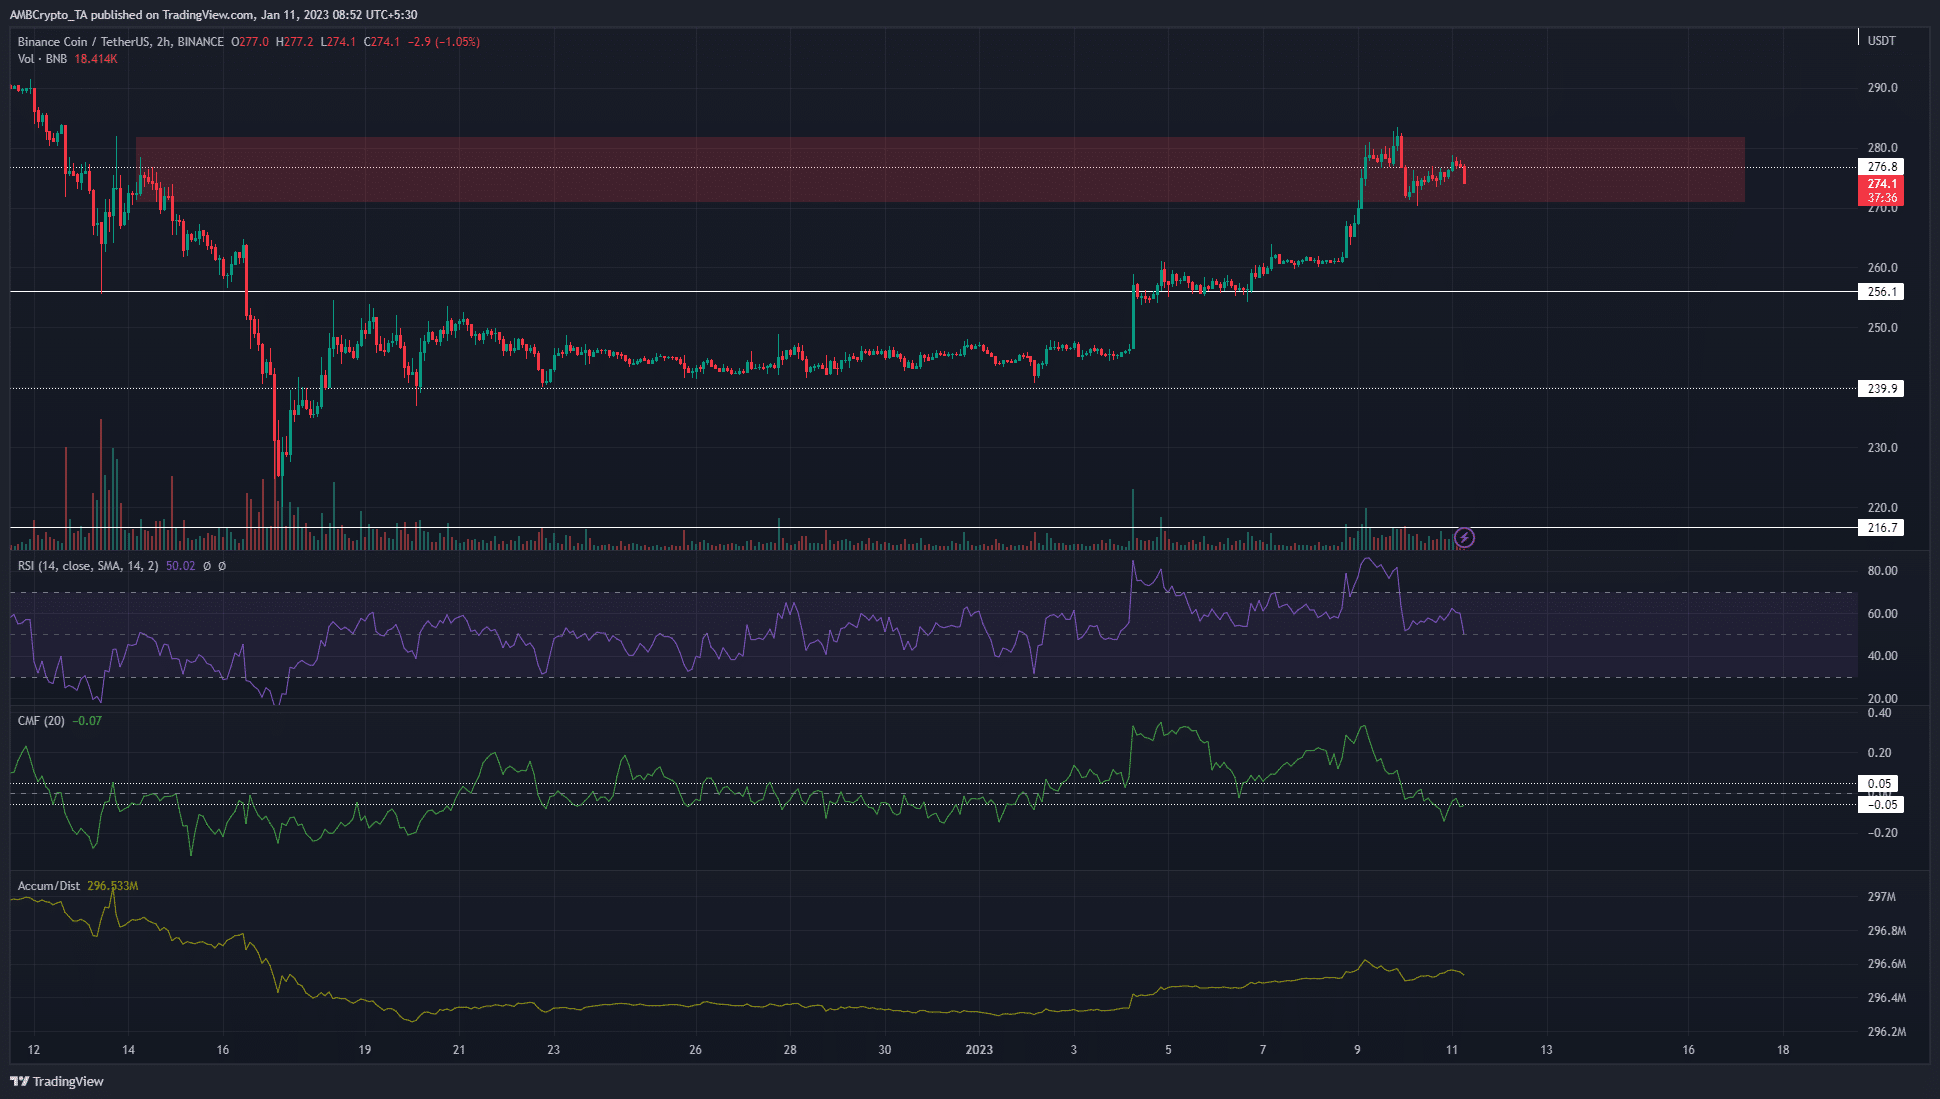 Binance Coin sees some selling pressure around $280, can bulls break through?